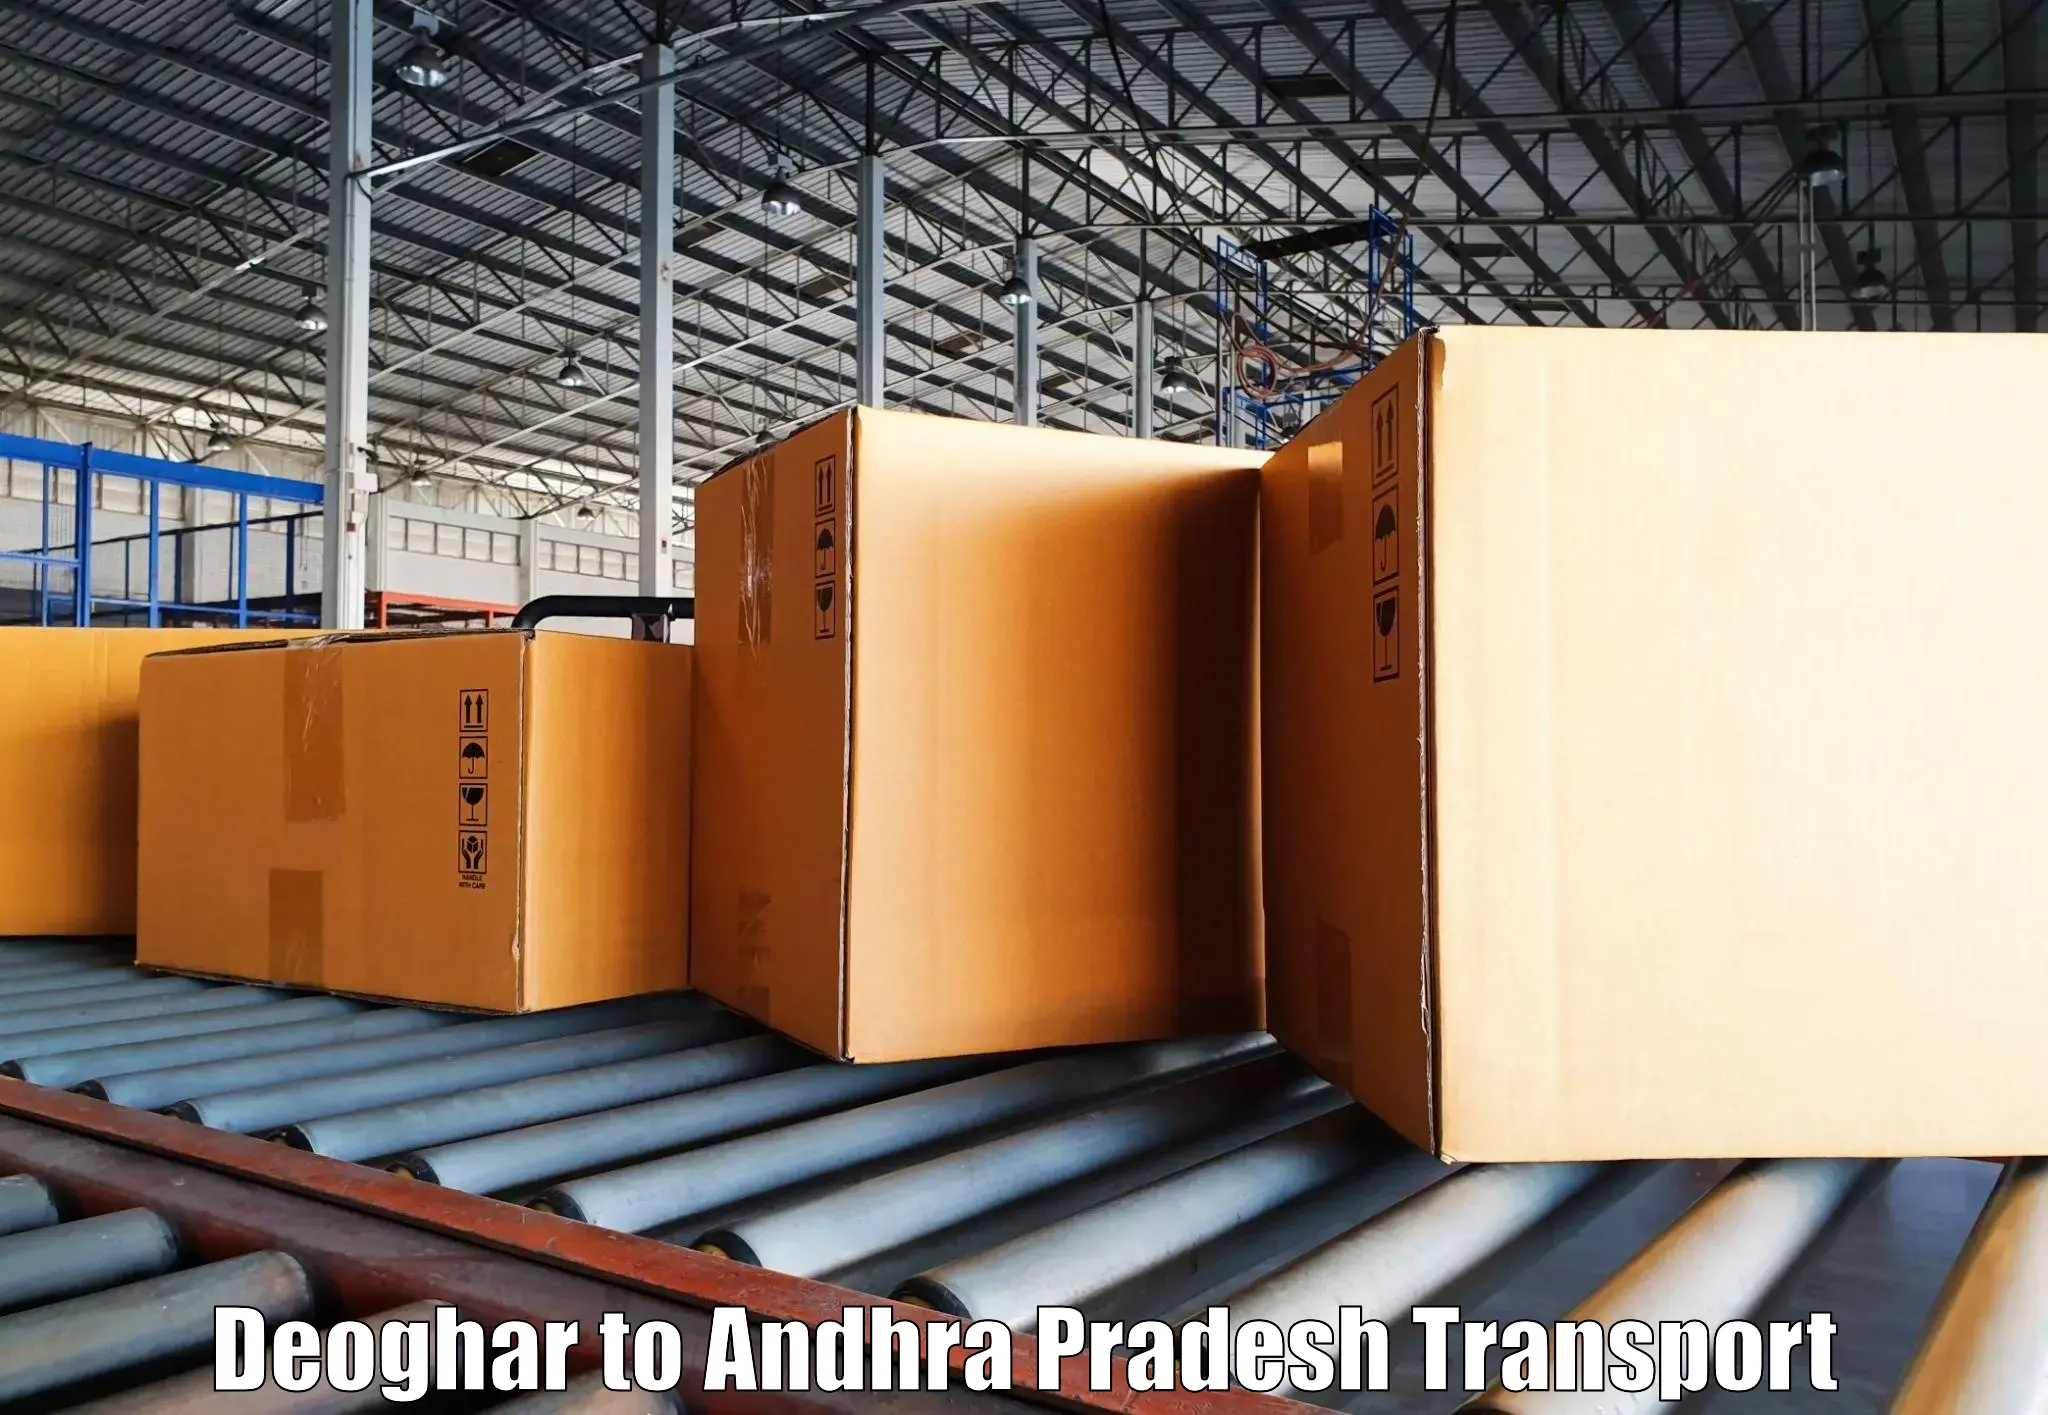 Part load transport service in India Deoghar to Kadiri